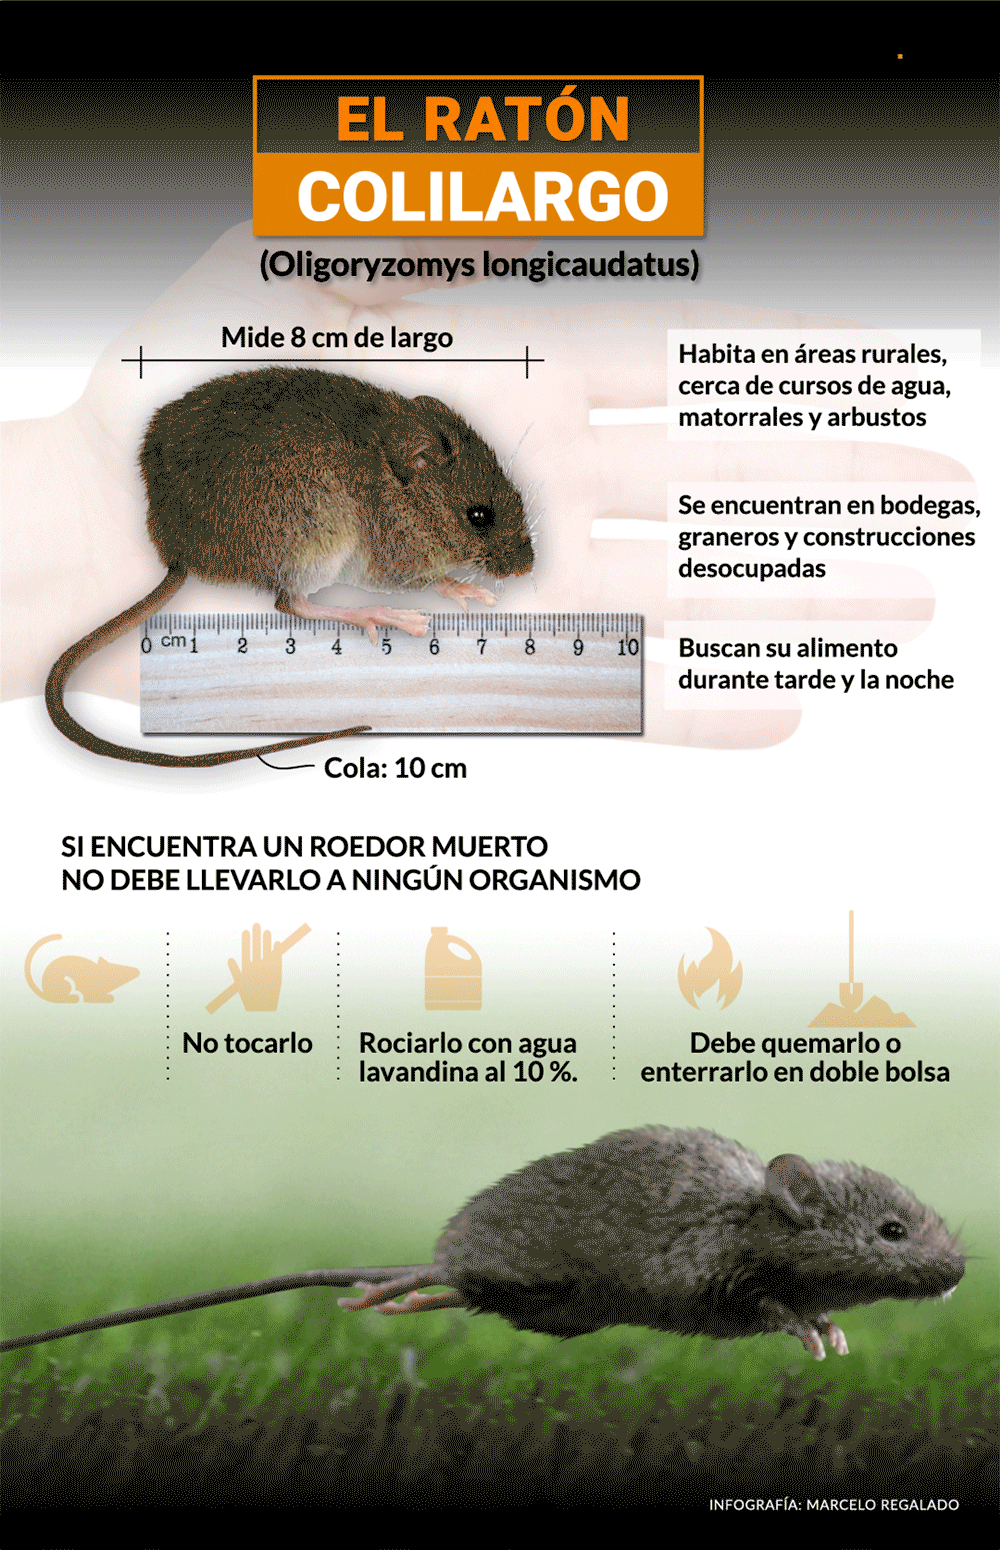 The long-tailed mouse is a type of rodent that can transmit disease